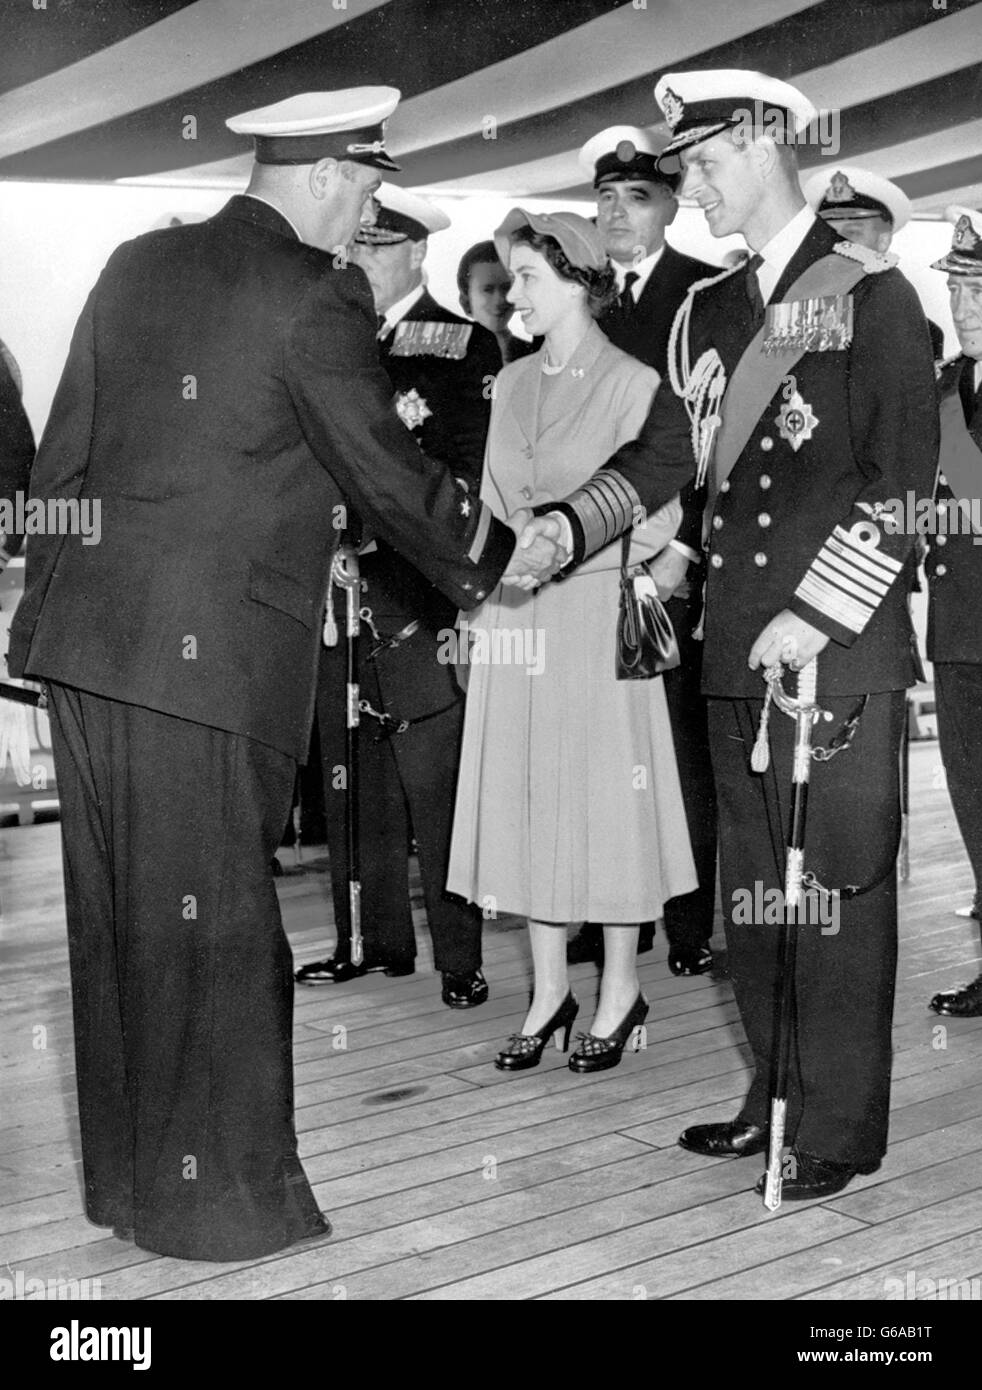 The Queen and the Duke of Edinburgh receiving Captain (First Rank) O. V. Rudakov (left) of the Soviet cruiser Sverdlov on board the Royal yacht - the dispatch vessel HMS Surprise - before the Spithead naval review. The Queen was receiving senior officers of the Royal Navy, and Commonwealth navies and officers of British merchant ships and trawlers which were to be reviewed by her. Stock Photo